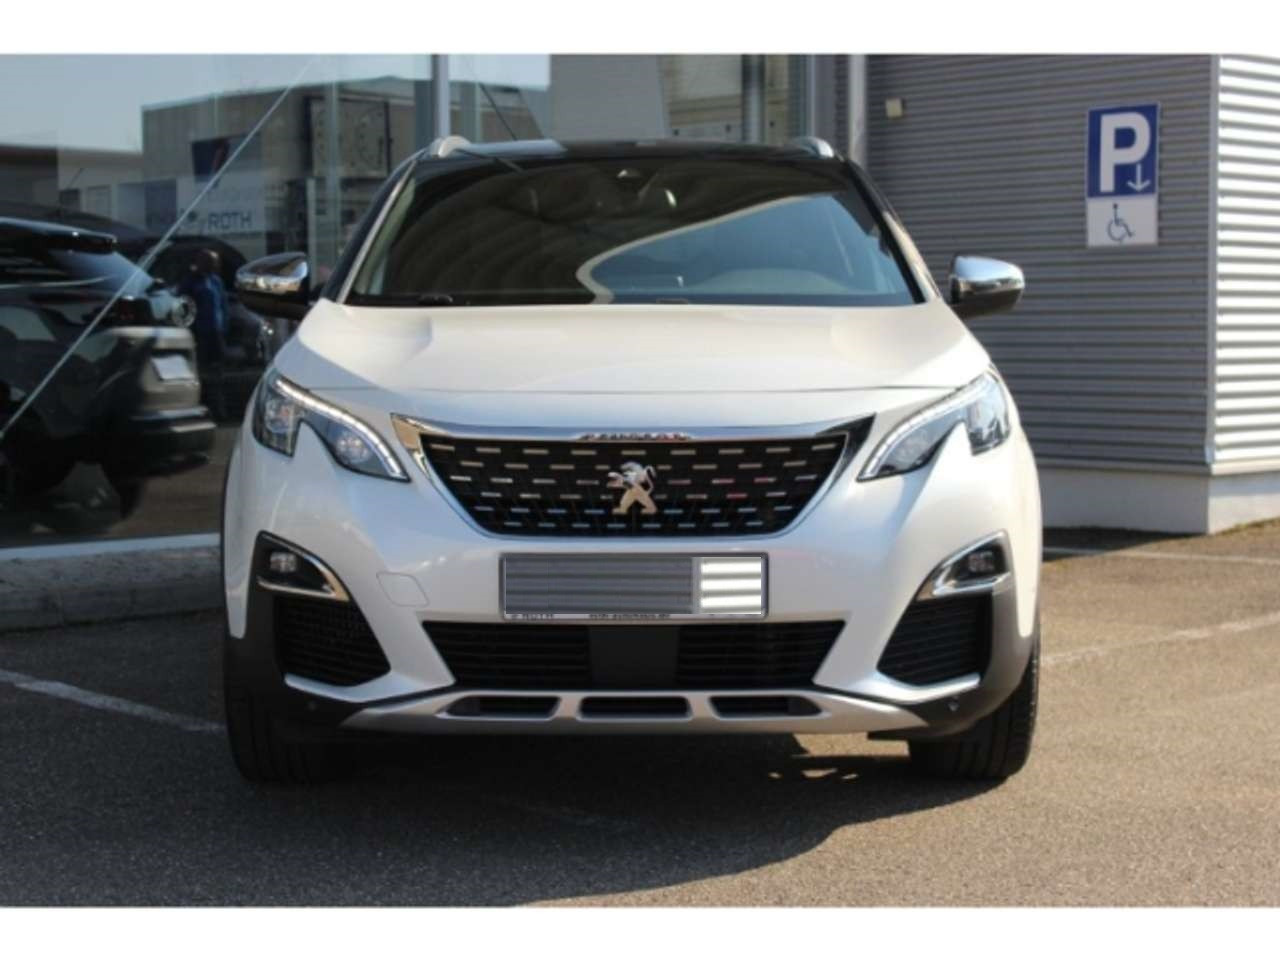 
                                                Voiture
                                                 PEUGEOT 3008 HDI  180ch